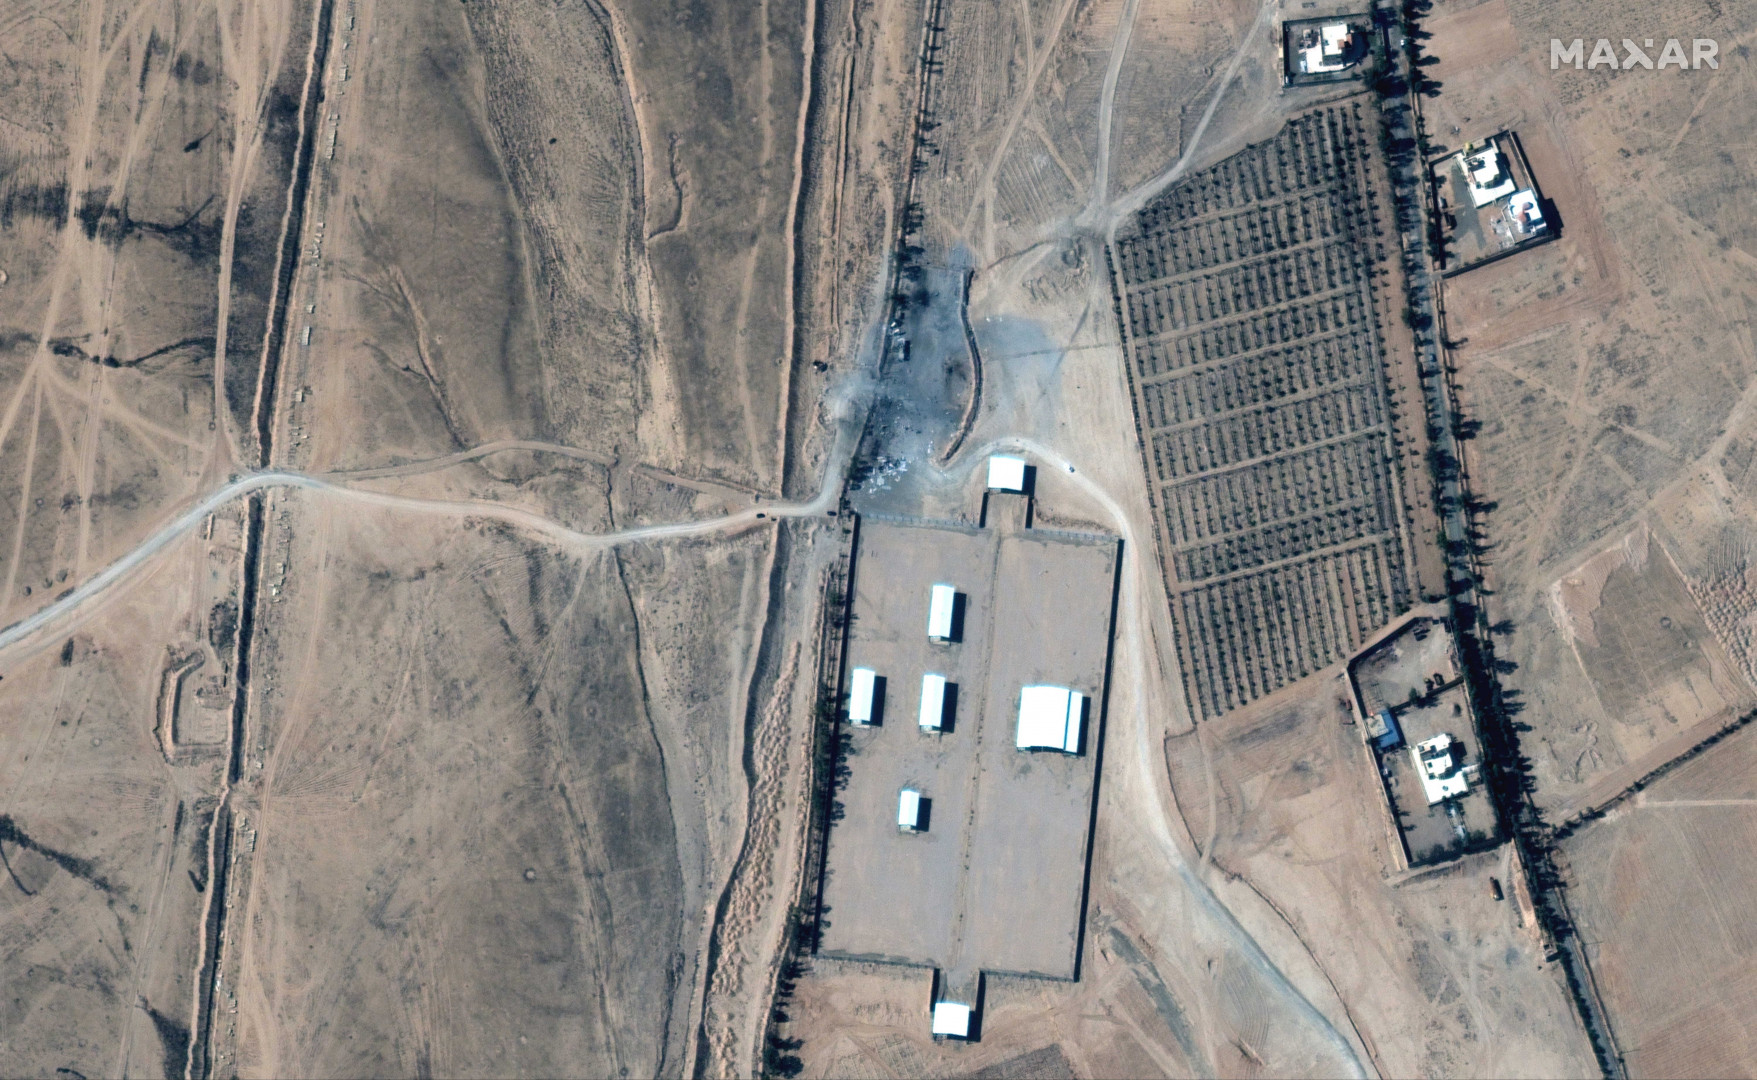 Satellite images reveal extent of damage caused by Biden administration's first military action